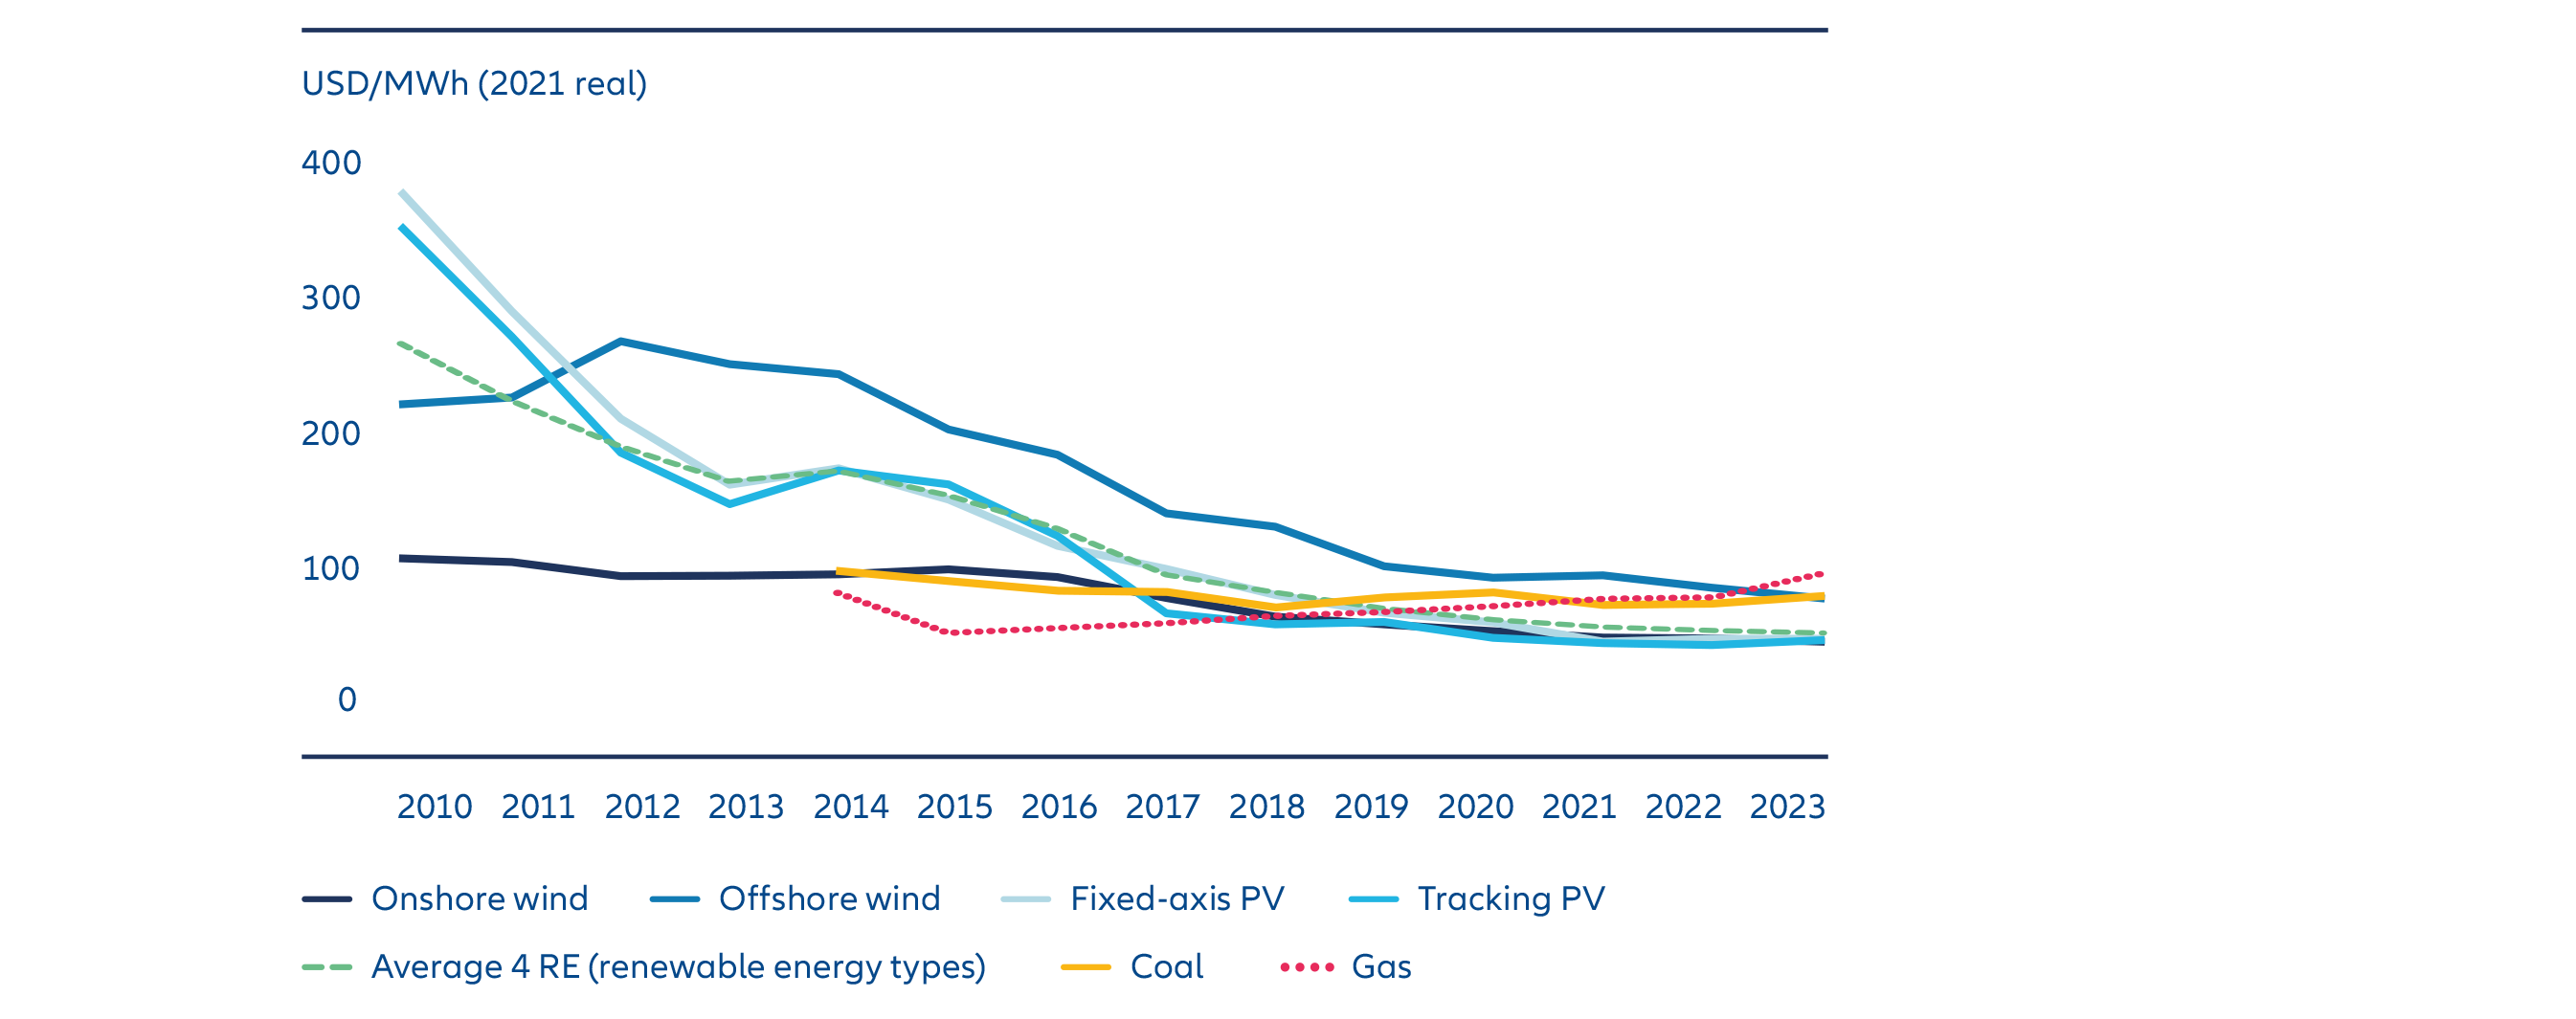 Exhibit 2: chart showing levelised cost of energy in USD/MWh (2021 real) from 2010 to 2023 for different types of solar and wind energy, coal and gas